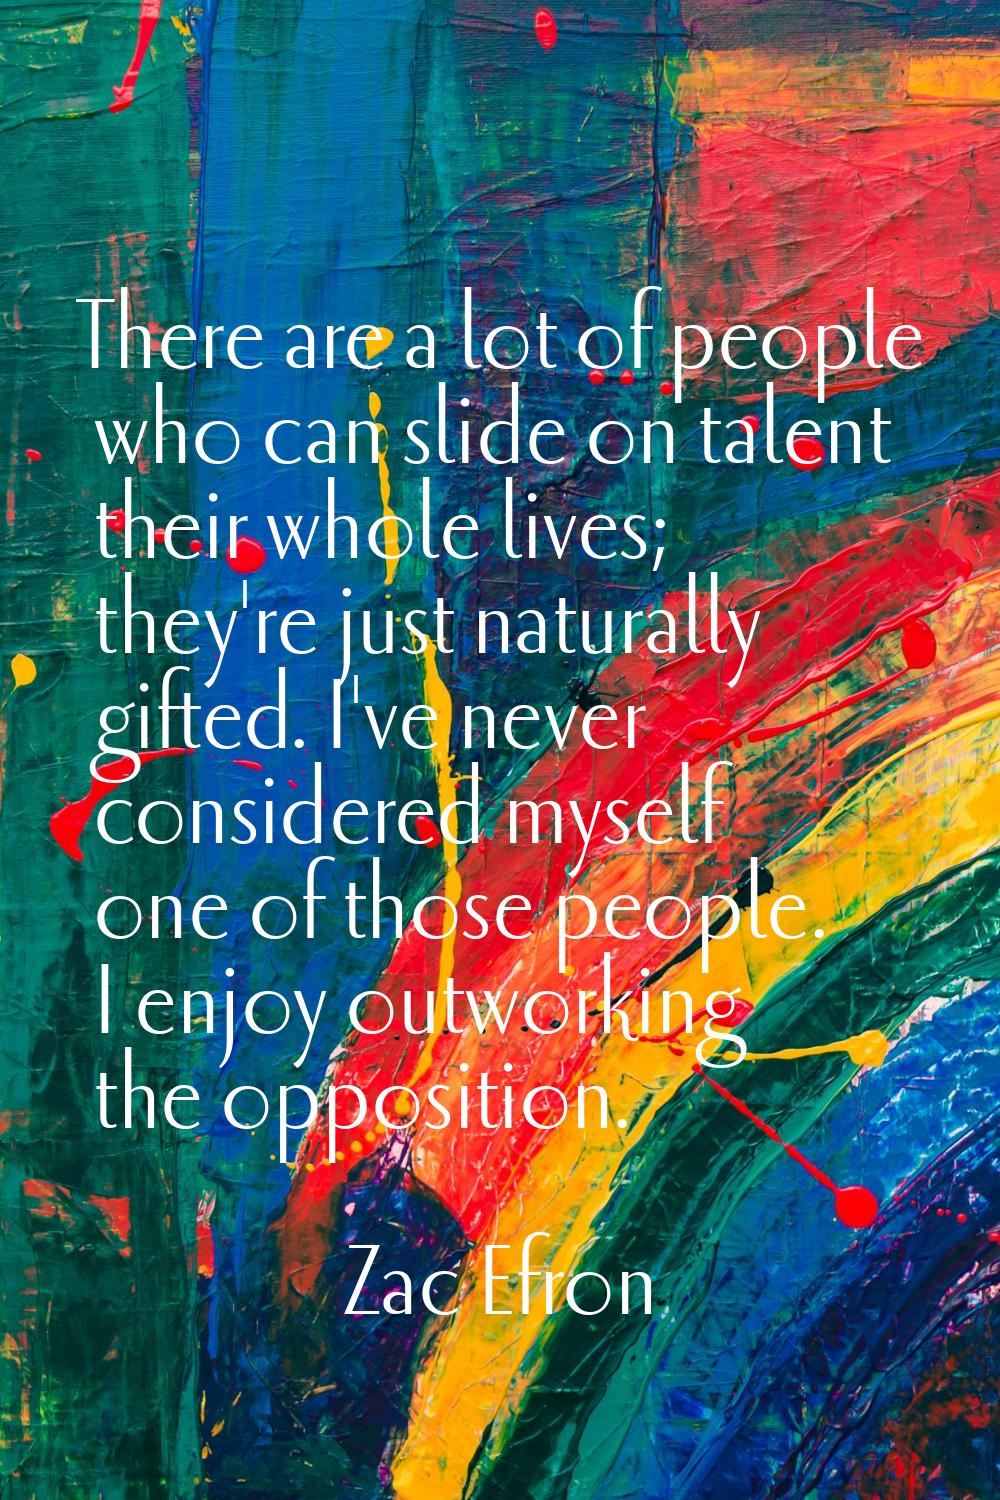 There are a lot of people who can slide on talent their whole lives; they're just naturally gifted.